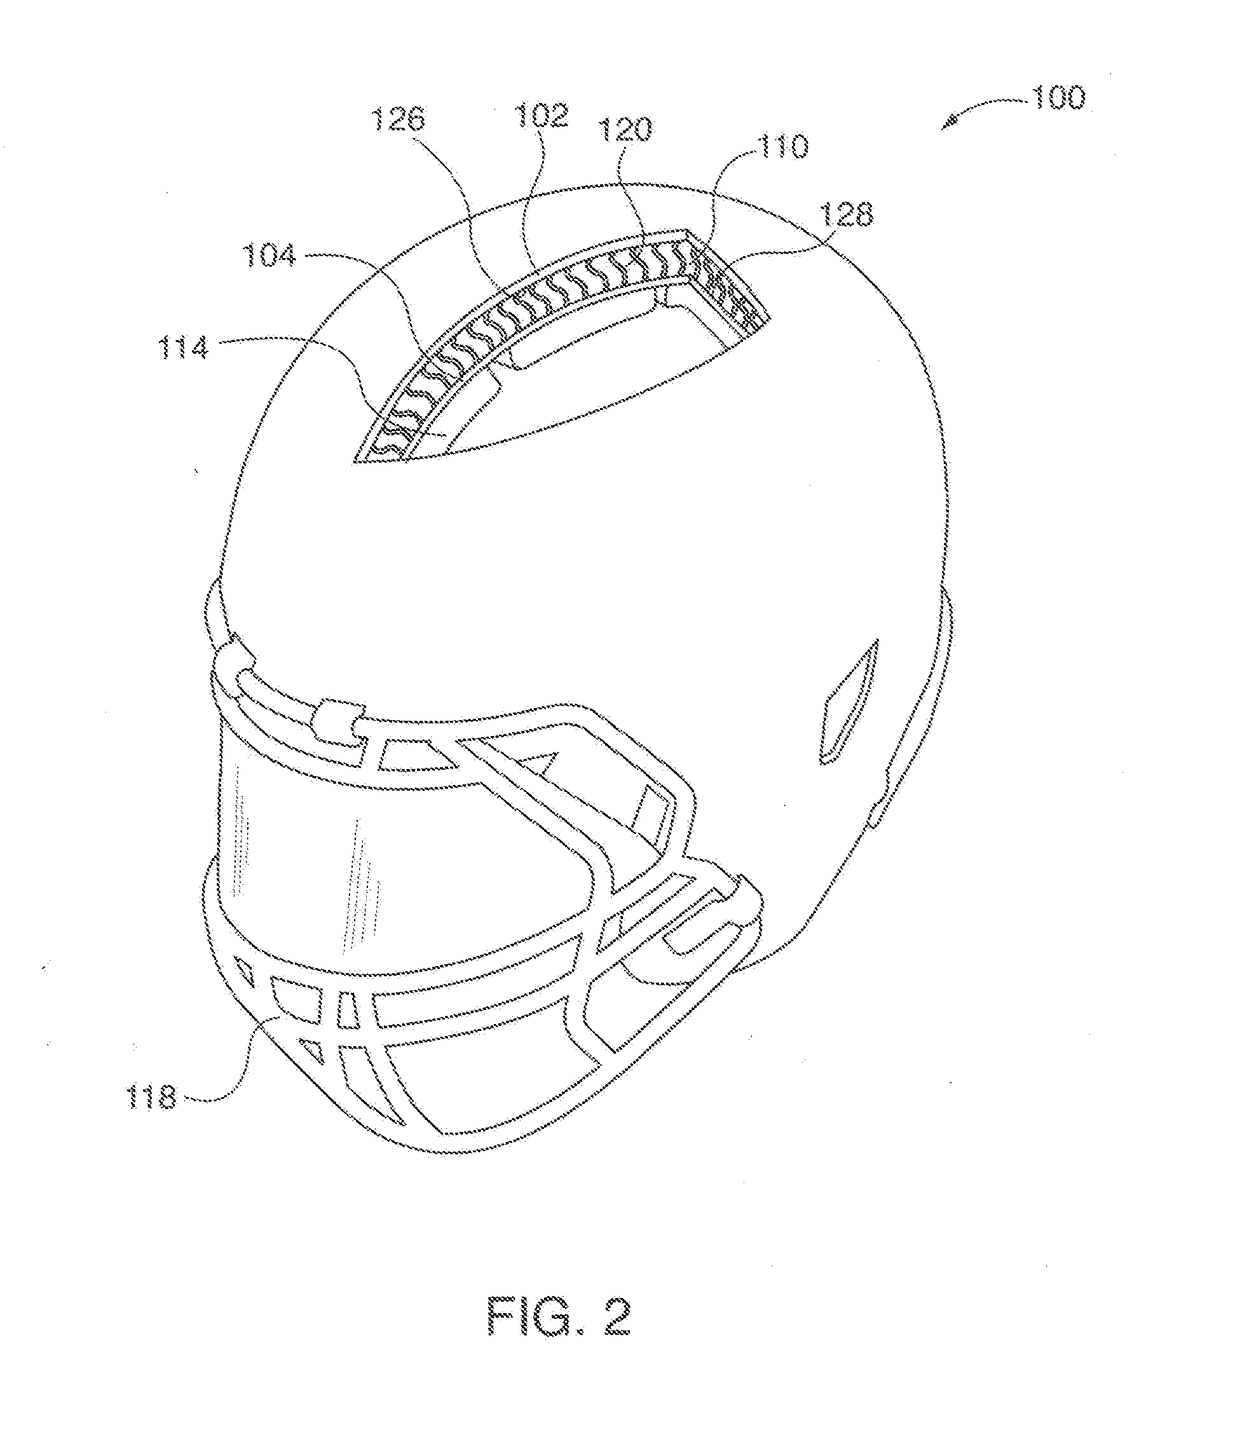 Biomimetic and inflatable energy-absorbing helmet to reduce head injuries and concussions